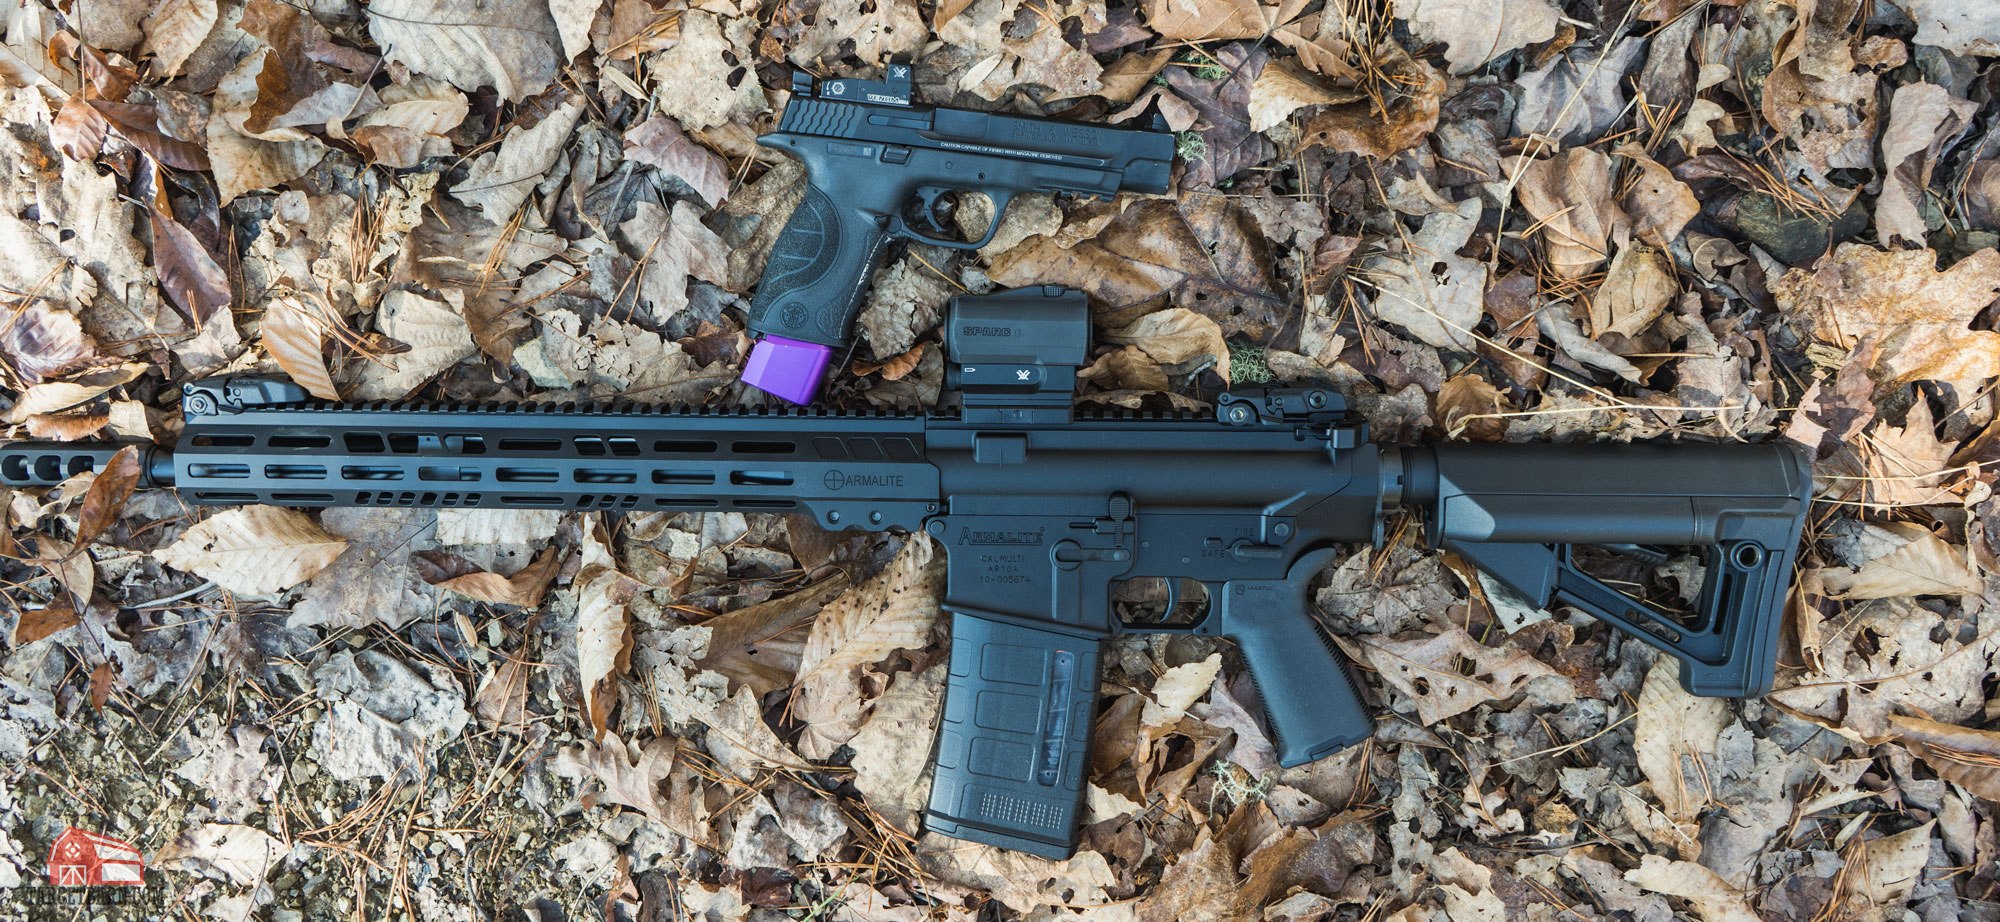 a pistol with a red dot mounted next to an ar-15 with a tubular red dot mounted